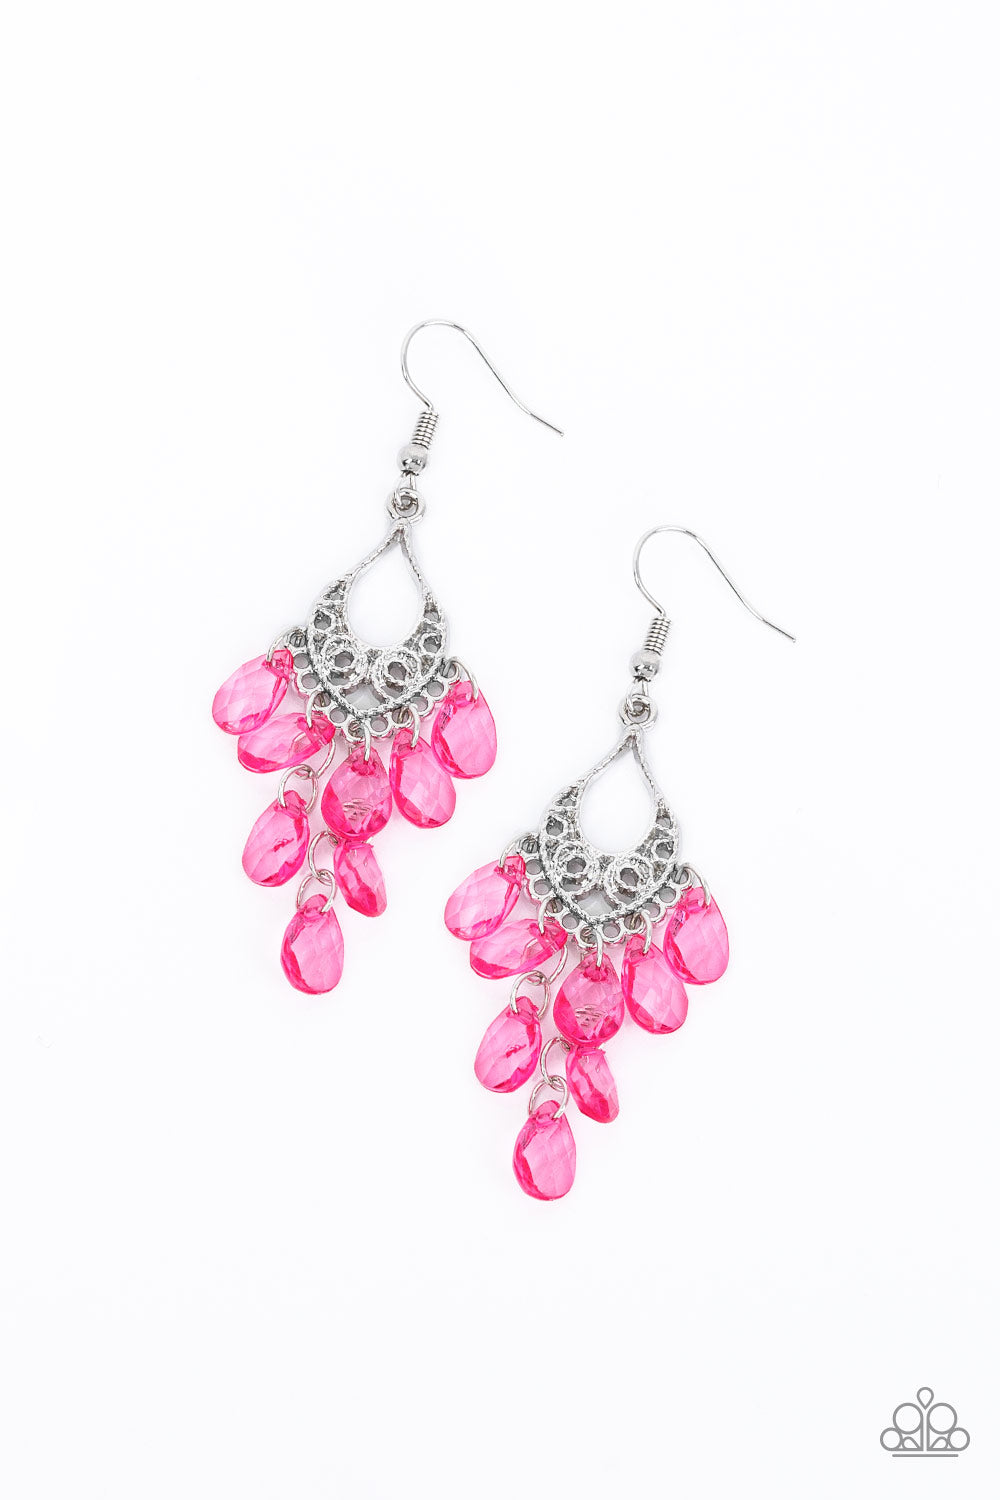 What Happens In Maui Pink Paparazzi Earrings Cashmere Pink Jewels - Cashmere Pink Jewels & Accessories, Cashmere Pink Jewels & Accessories - Paparazzi